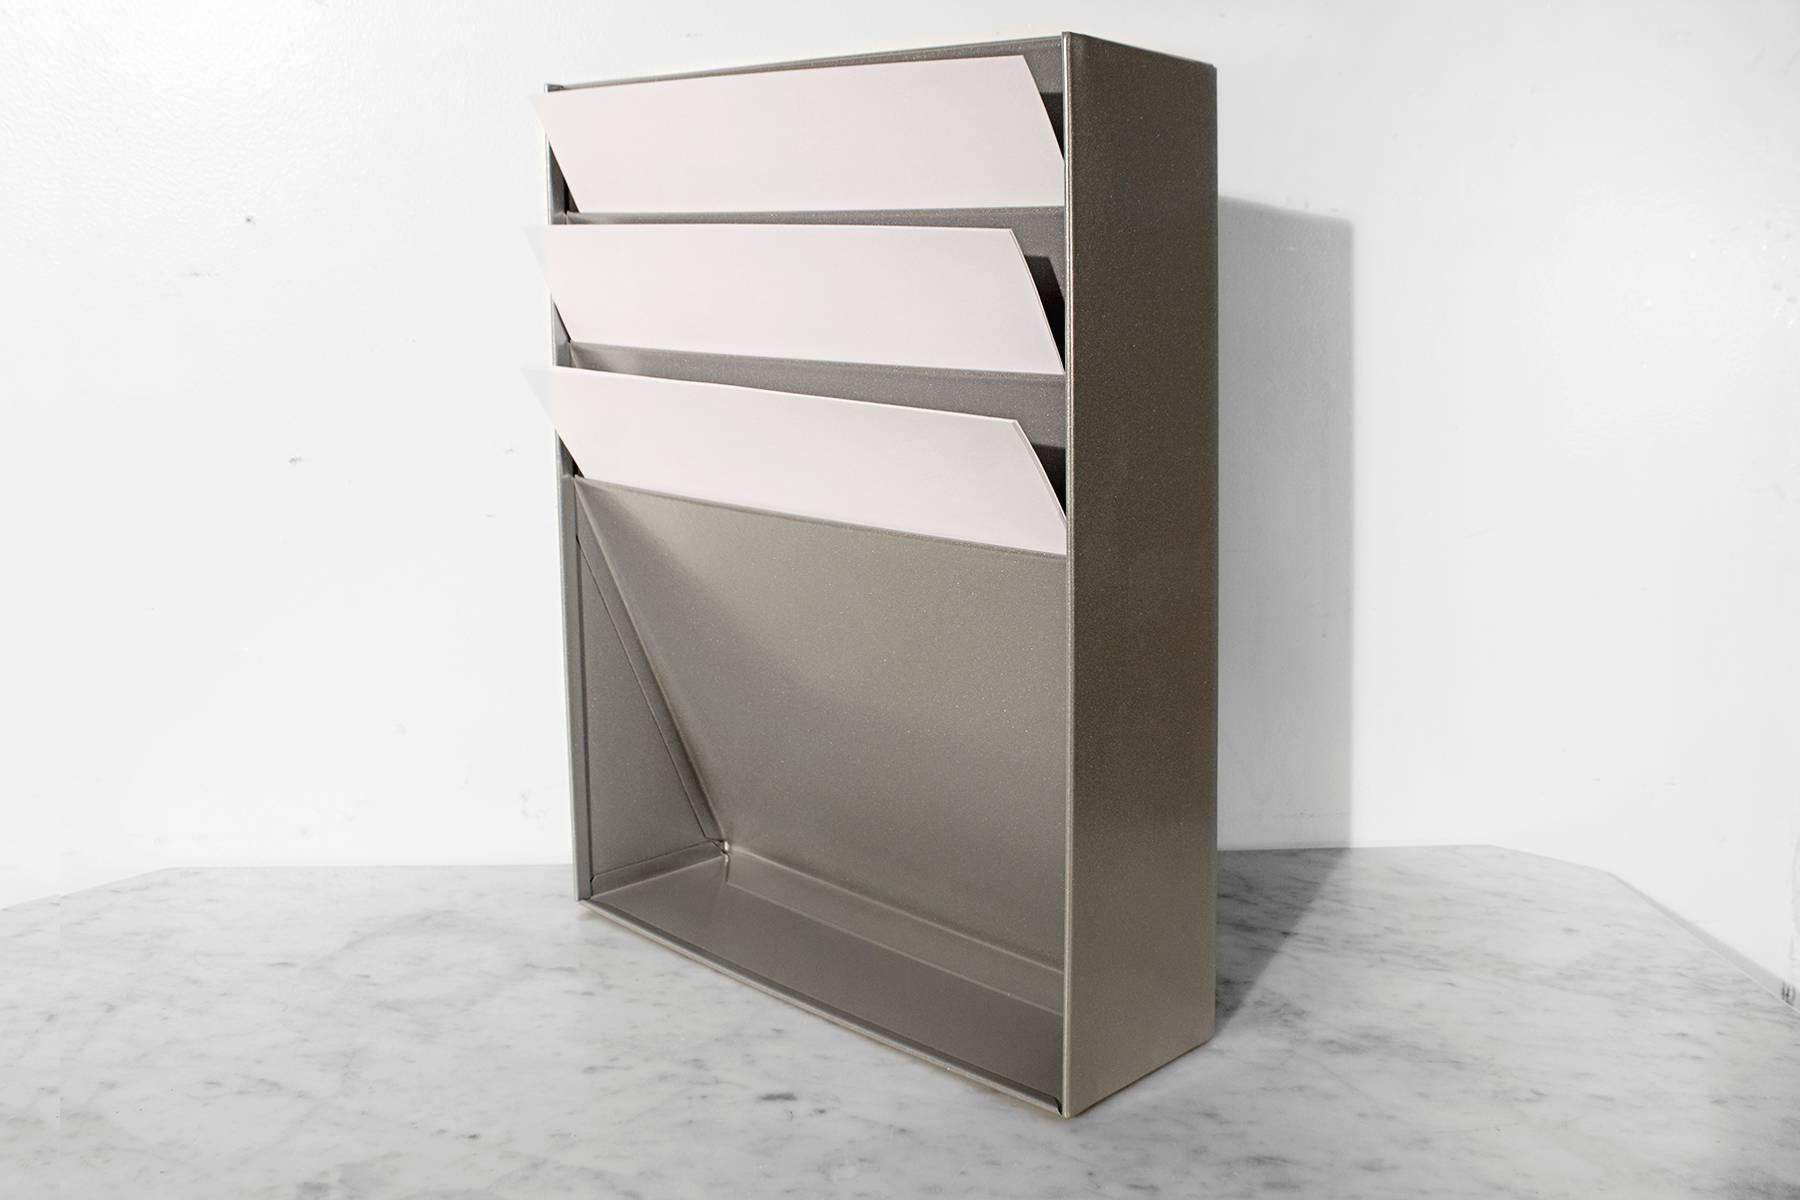 1960s retro office file/ magazine holder stripped and freshly powder coated in silver metallic. Features three paper slots sure to keep your Mid-Century Modern desk in tip-top shape. Easily wall-mounts.

Dimensions: 4" D x 11.5" W x